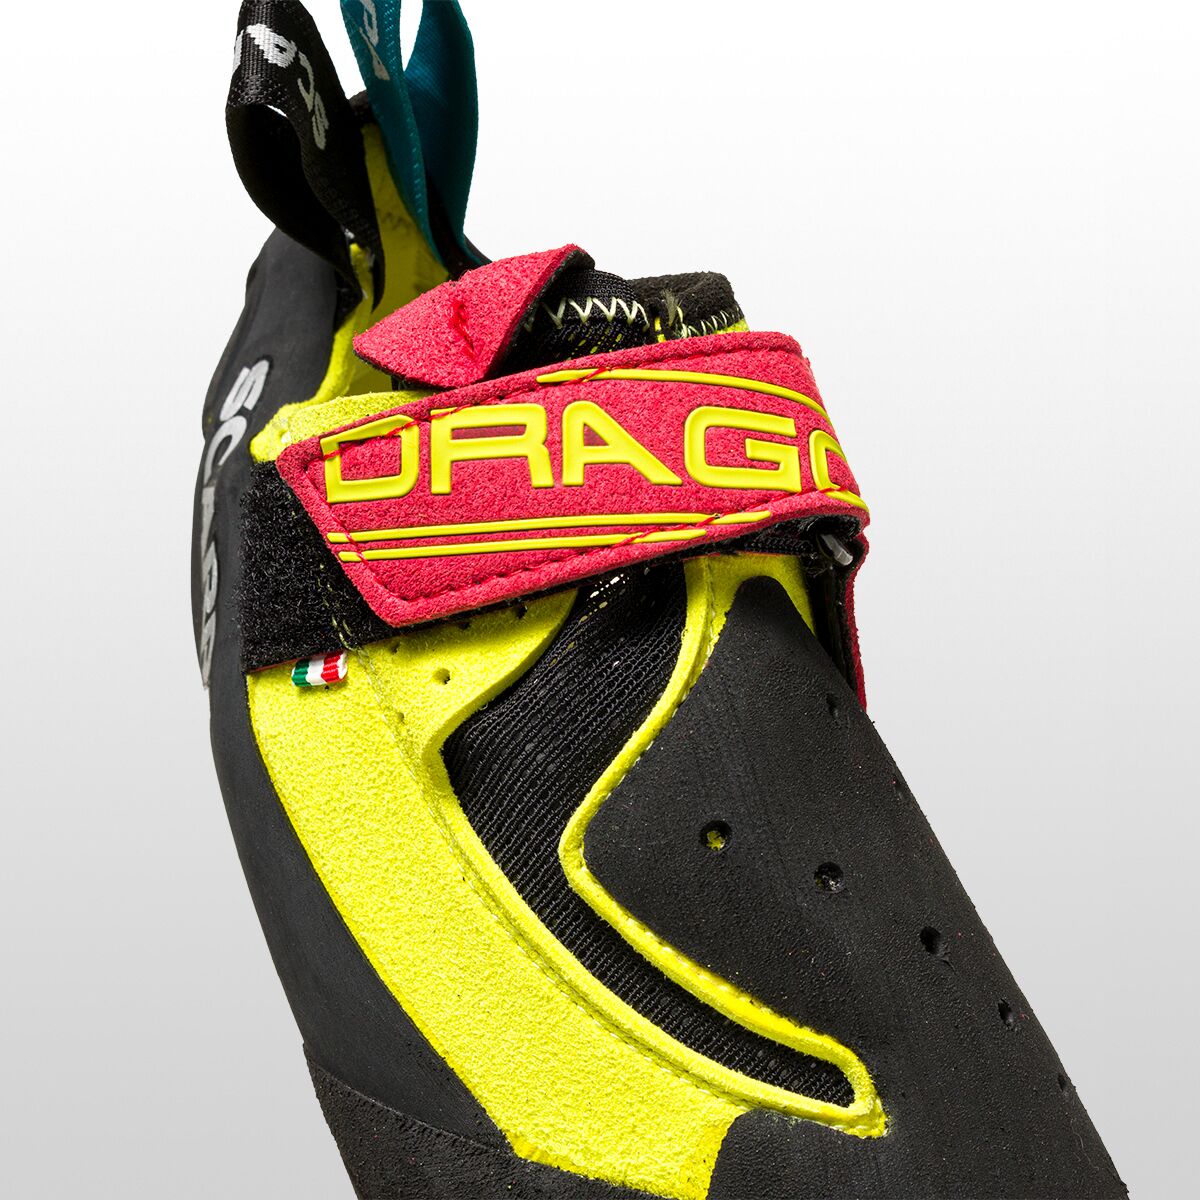  SCARPA Drago Rock Climbing Shoes for Sport Climbing and  Bouldering - Specialized Performance for Sensitivity - Yellow - 3-3.5